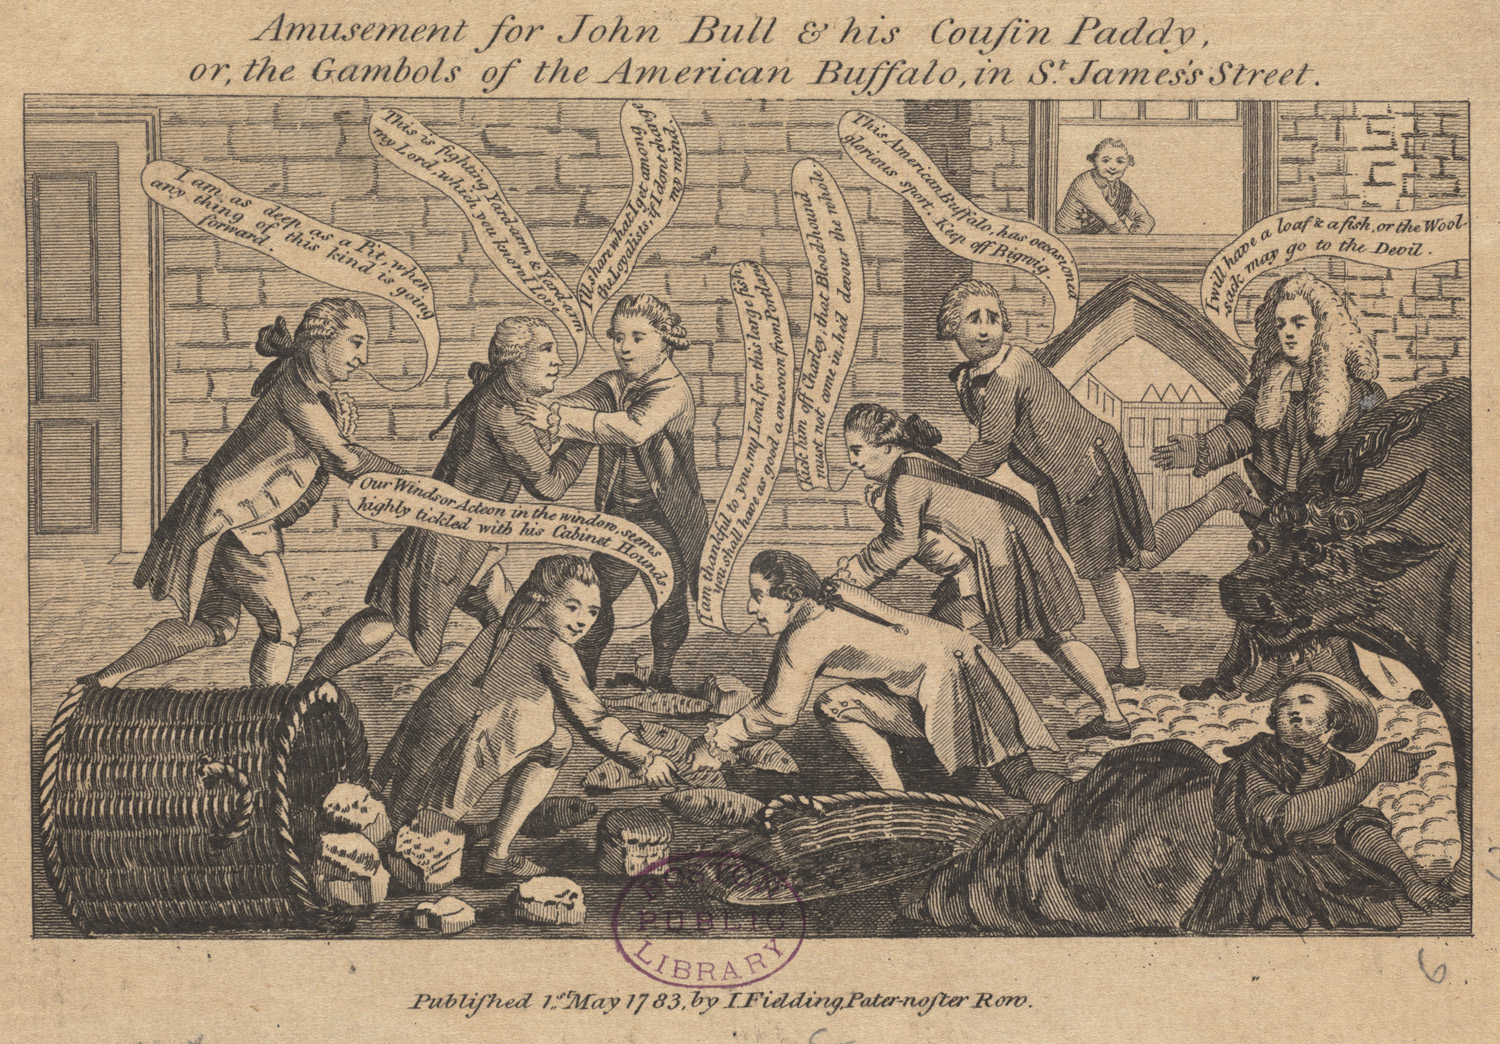 Paternoster Amusement for John Bull, his_cousin Paddy or the gambols of the American buffalo in St. Jamess street